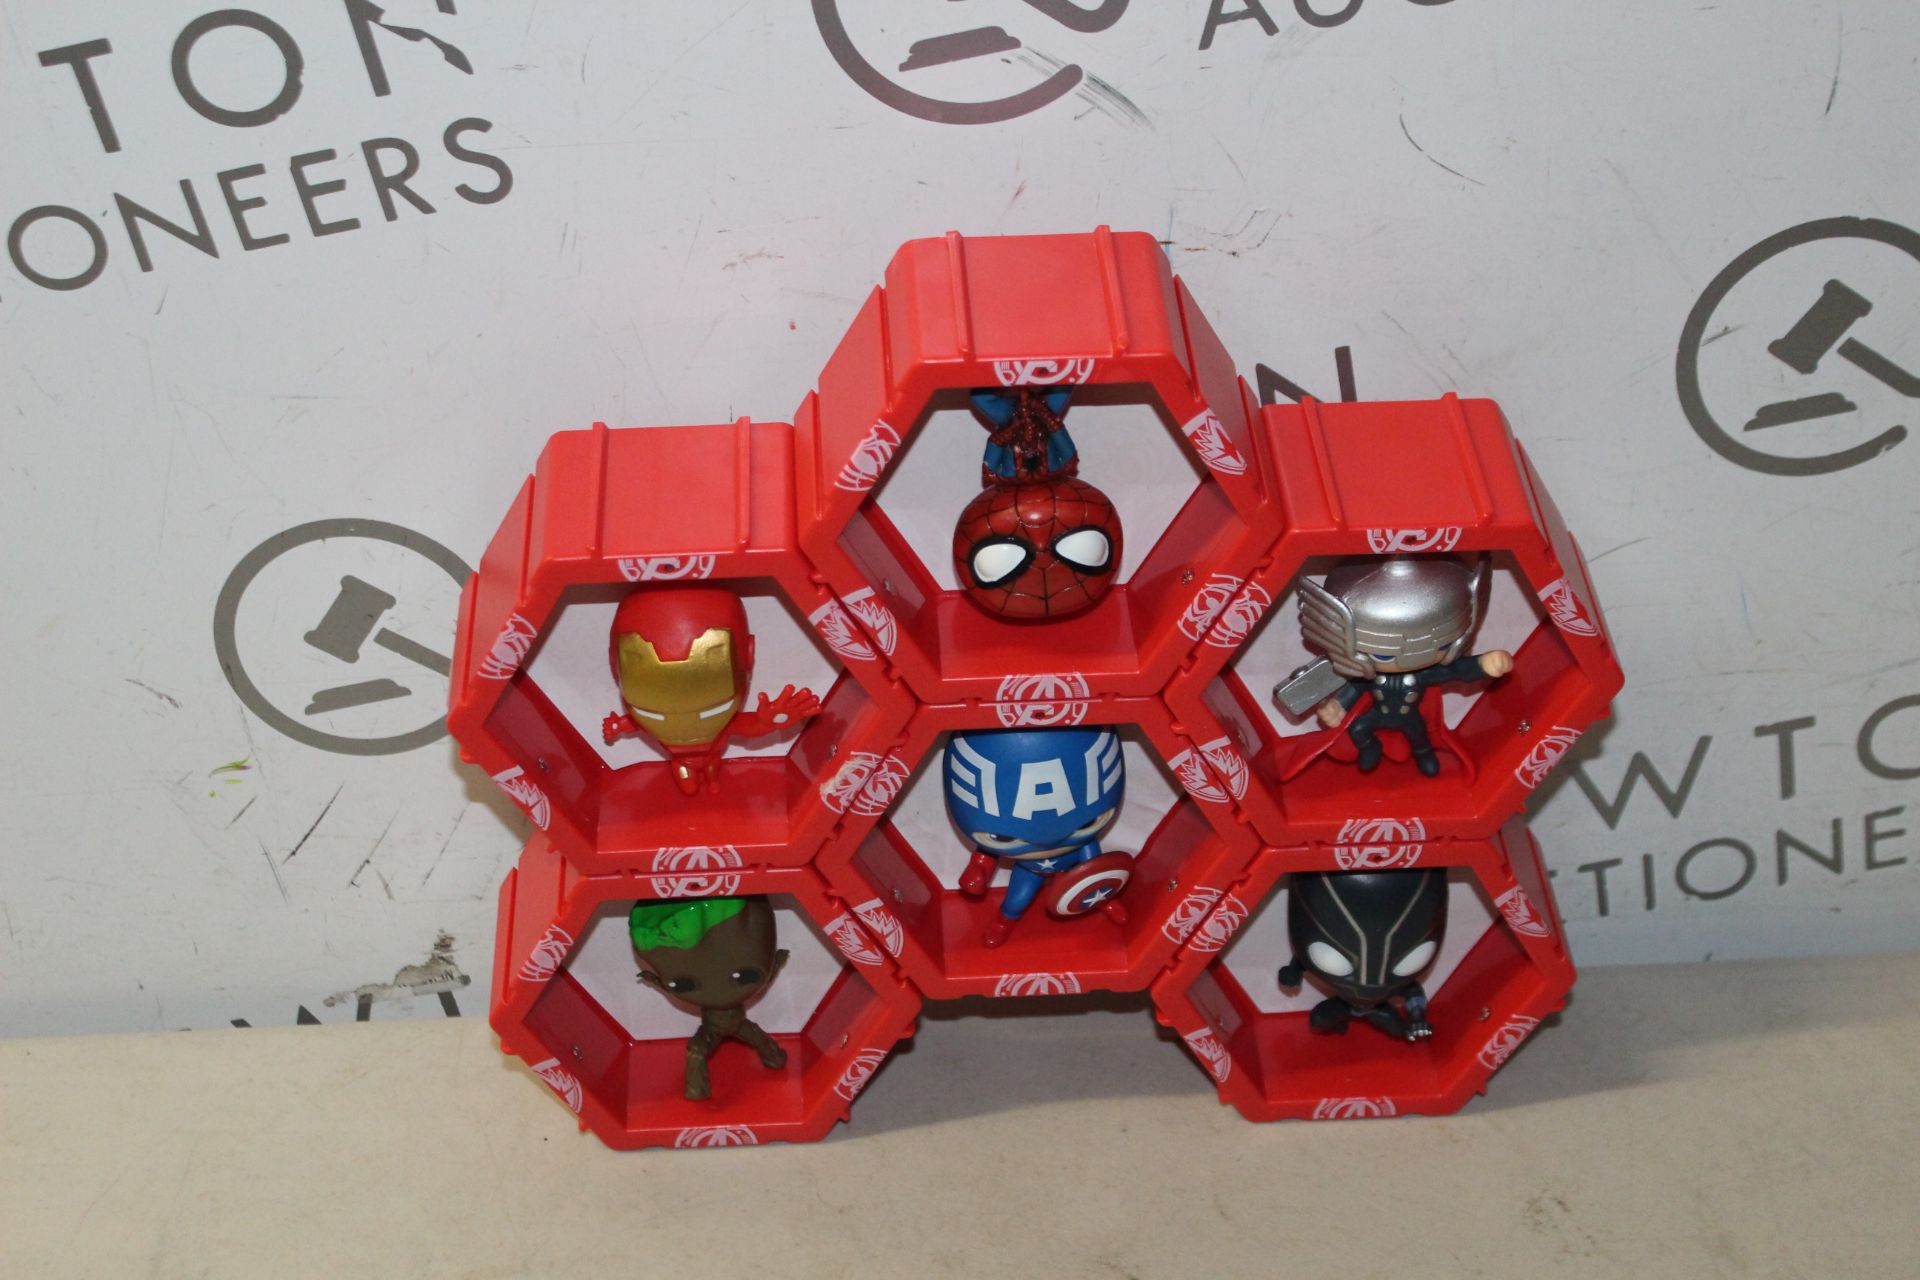 1 MARVEL WOW PODS 6 PACK (3+ YEARS) RRP Â£29